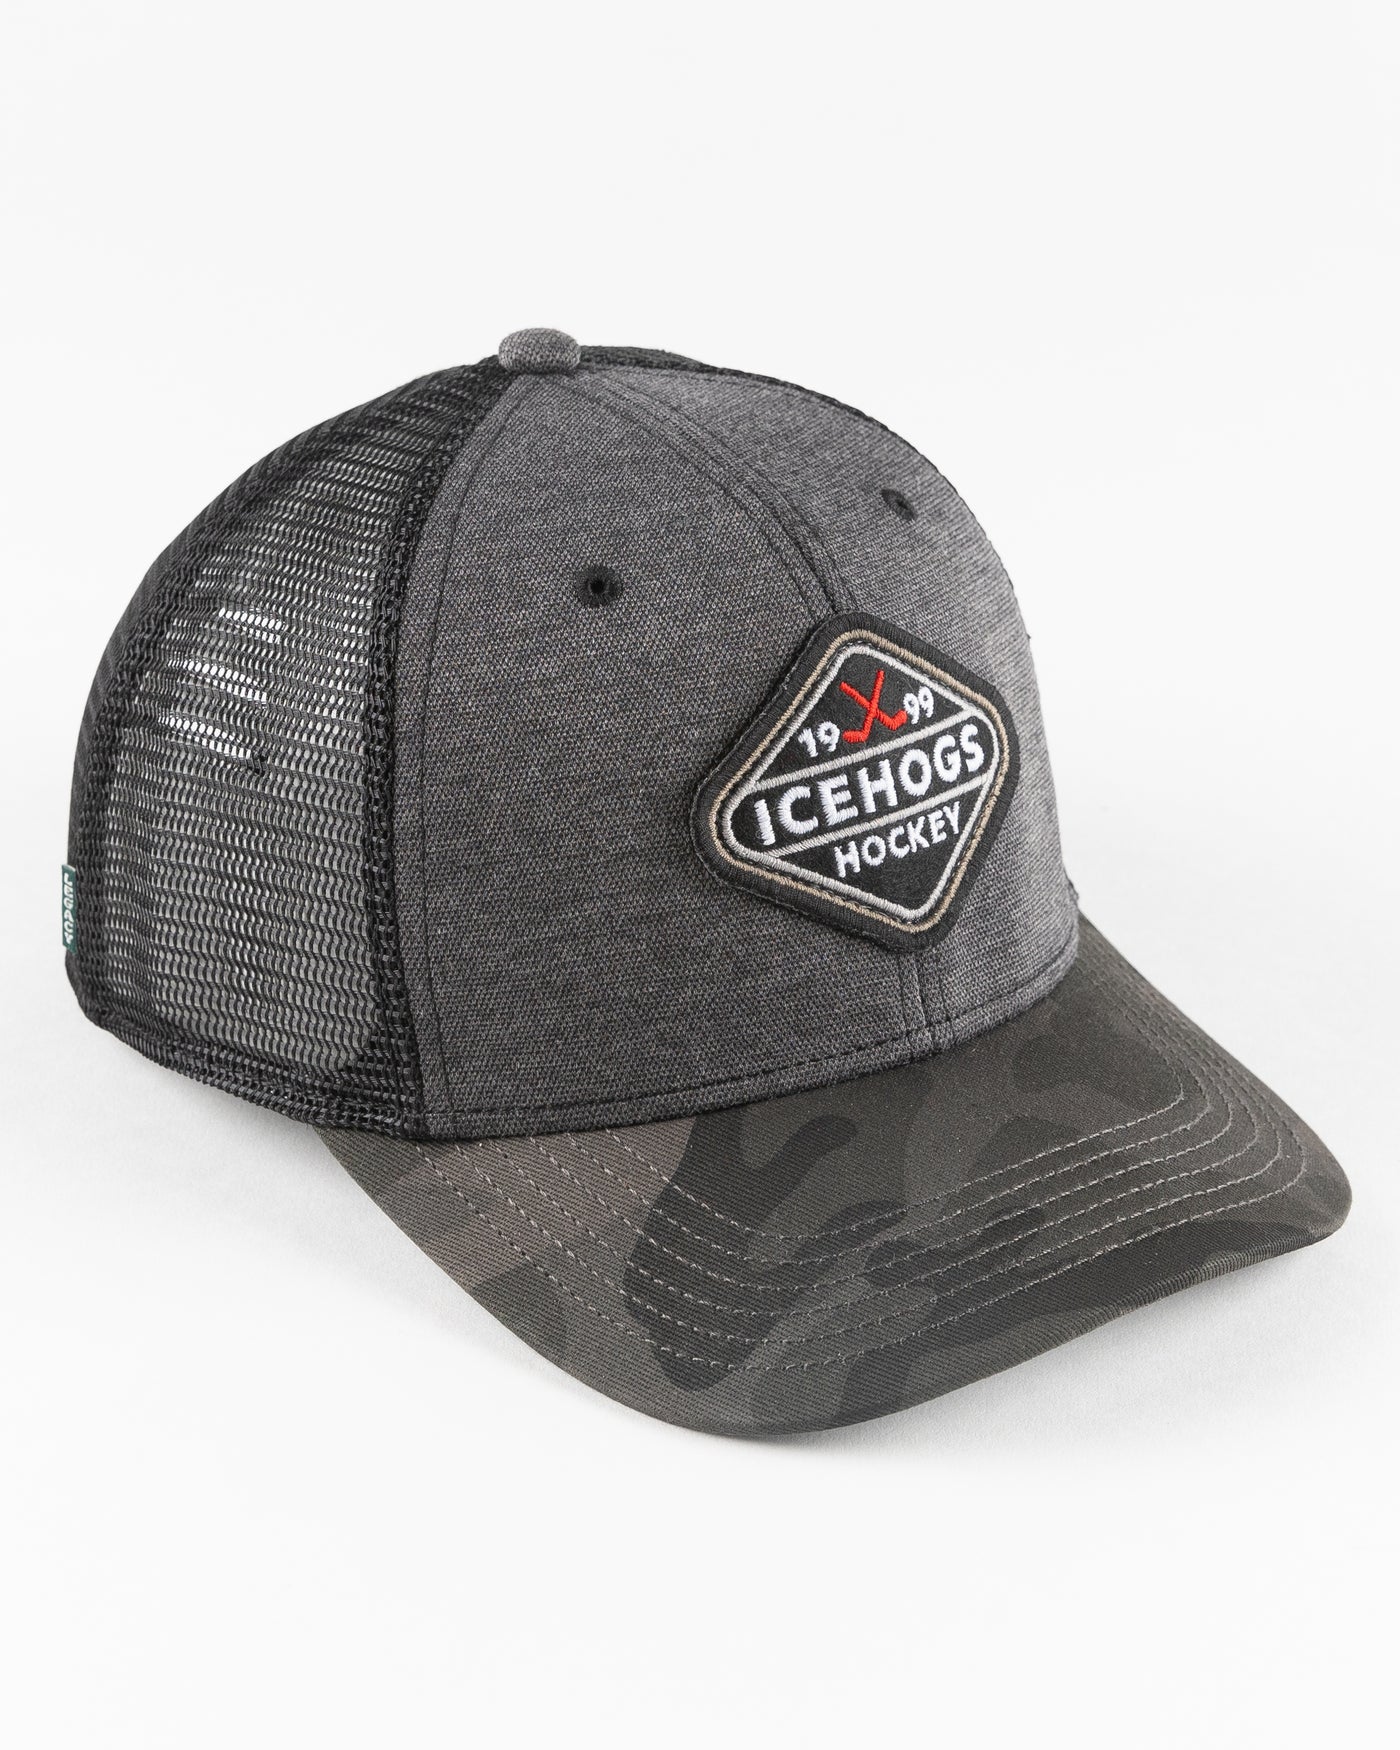 black Rockford IceHogs trucker with camo brim and embroidered patch - right angle lay flat